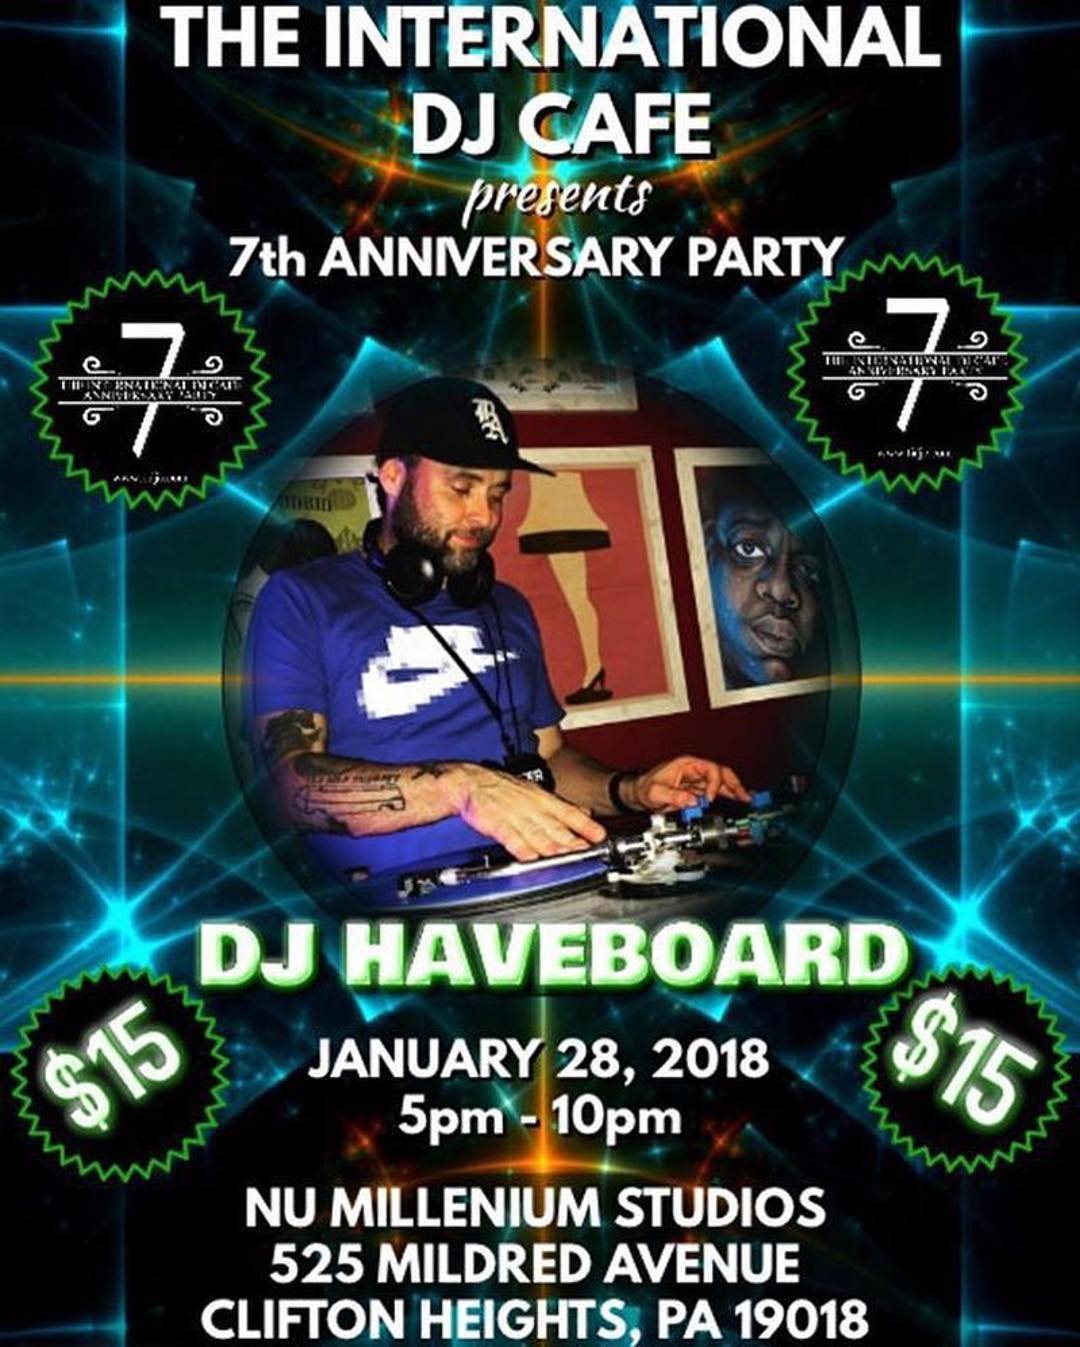 @haveboard
・・・
I’m working on a hot 15 minute set to showcase this Sunday at the @internationaldjcafe’s 7 year anniversary party @numstudios alongside a great list of heavy hitting DJs and Artists!. Check the link in the bio, my previous post, or djhaveboard.com for more details! Come check it out, the event is from 5 to 10, $15